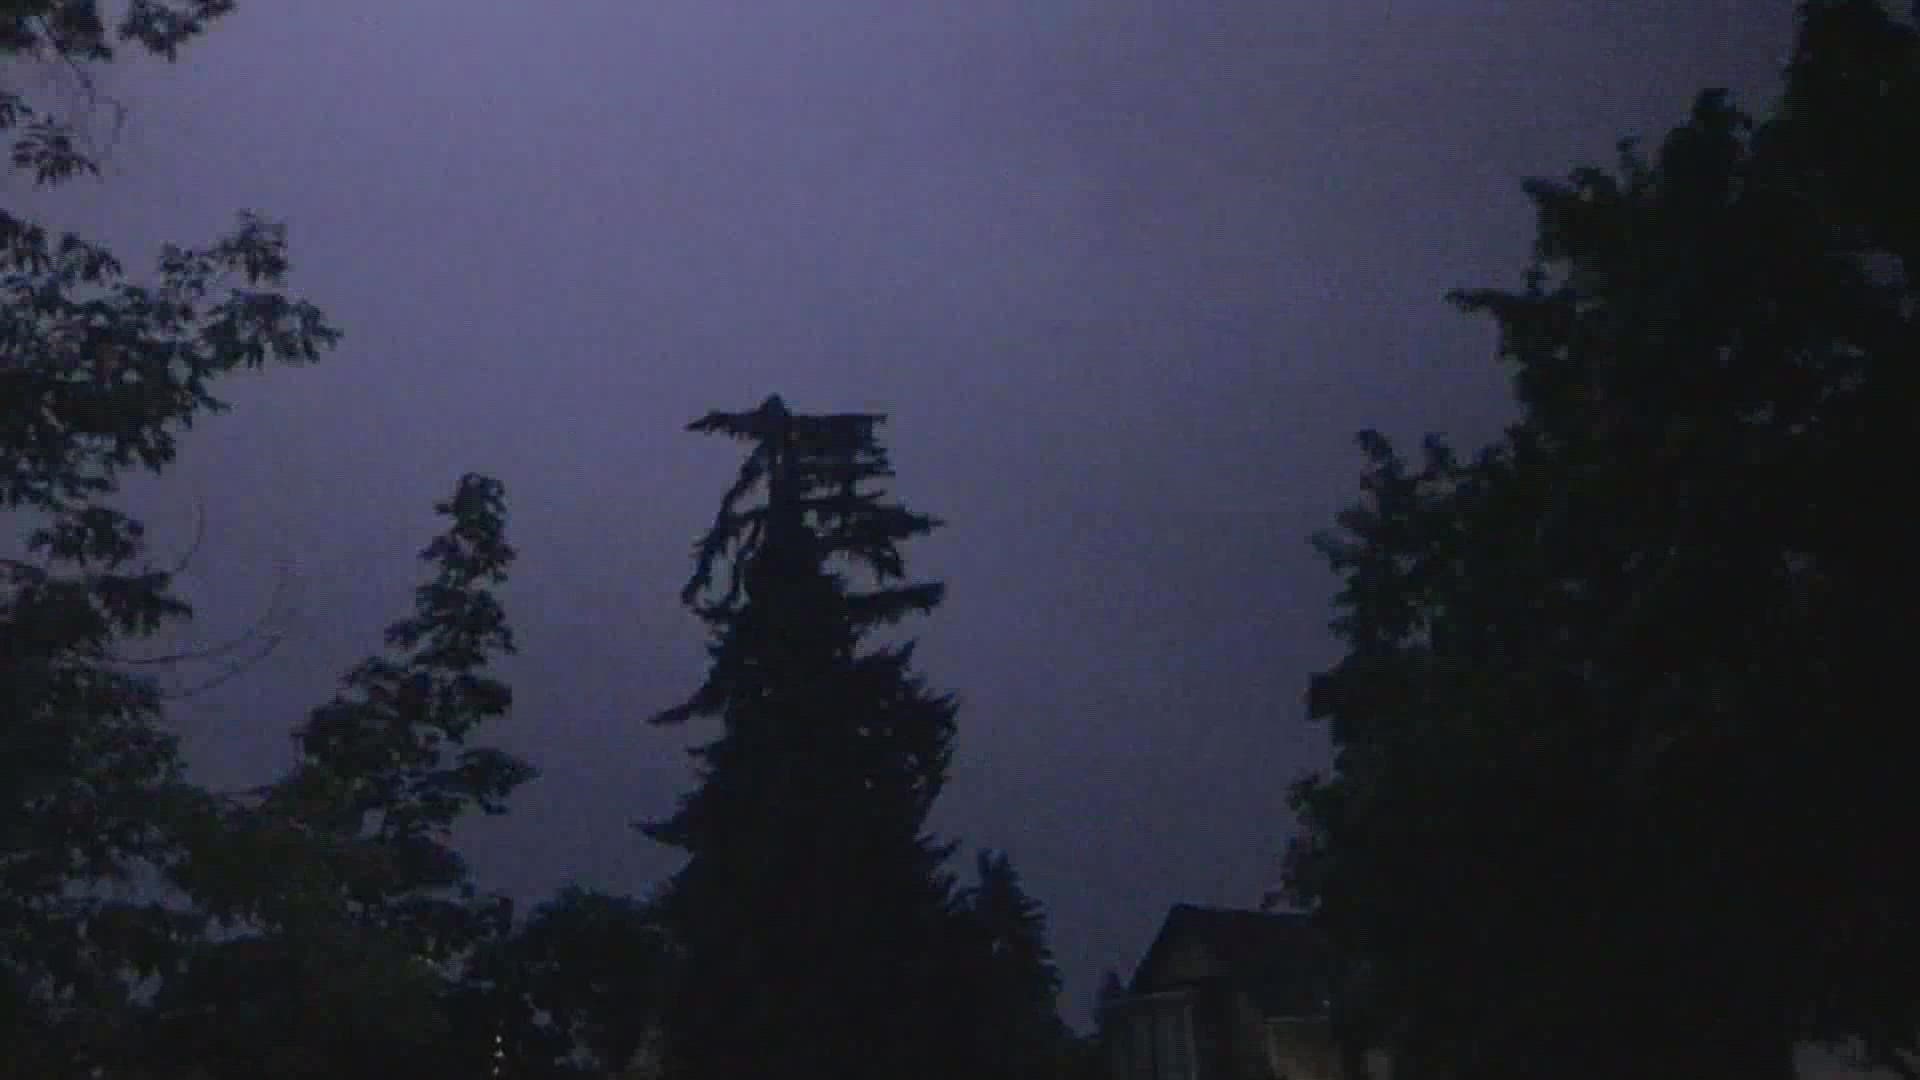 People across eastern Washington and north Idaho got a loud wake-up call in the middle of the night as strong thunderstorms rolled through the area.